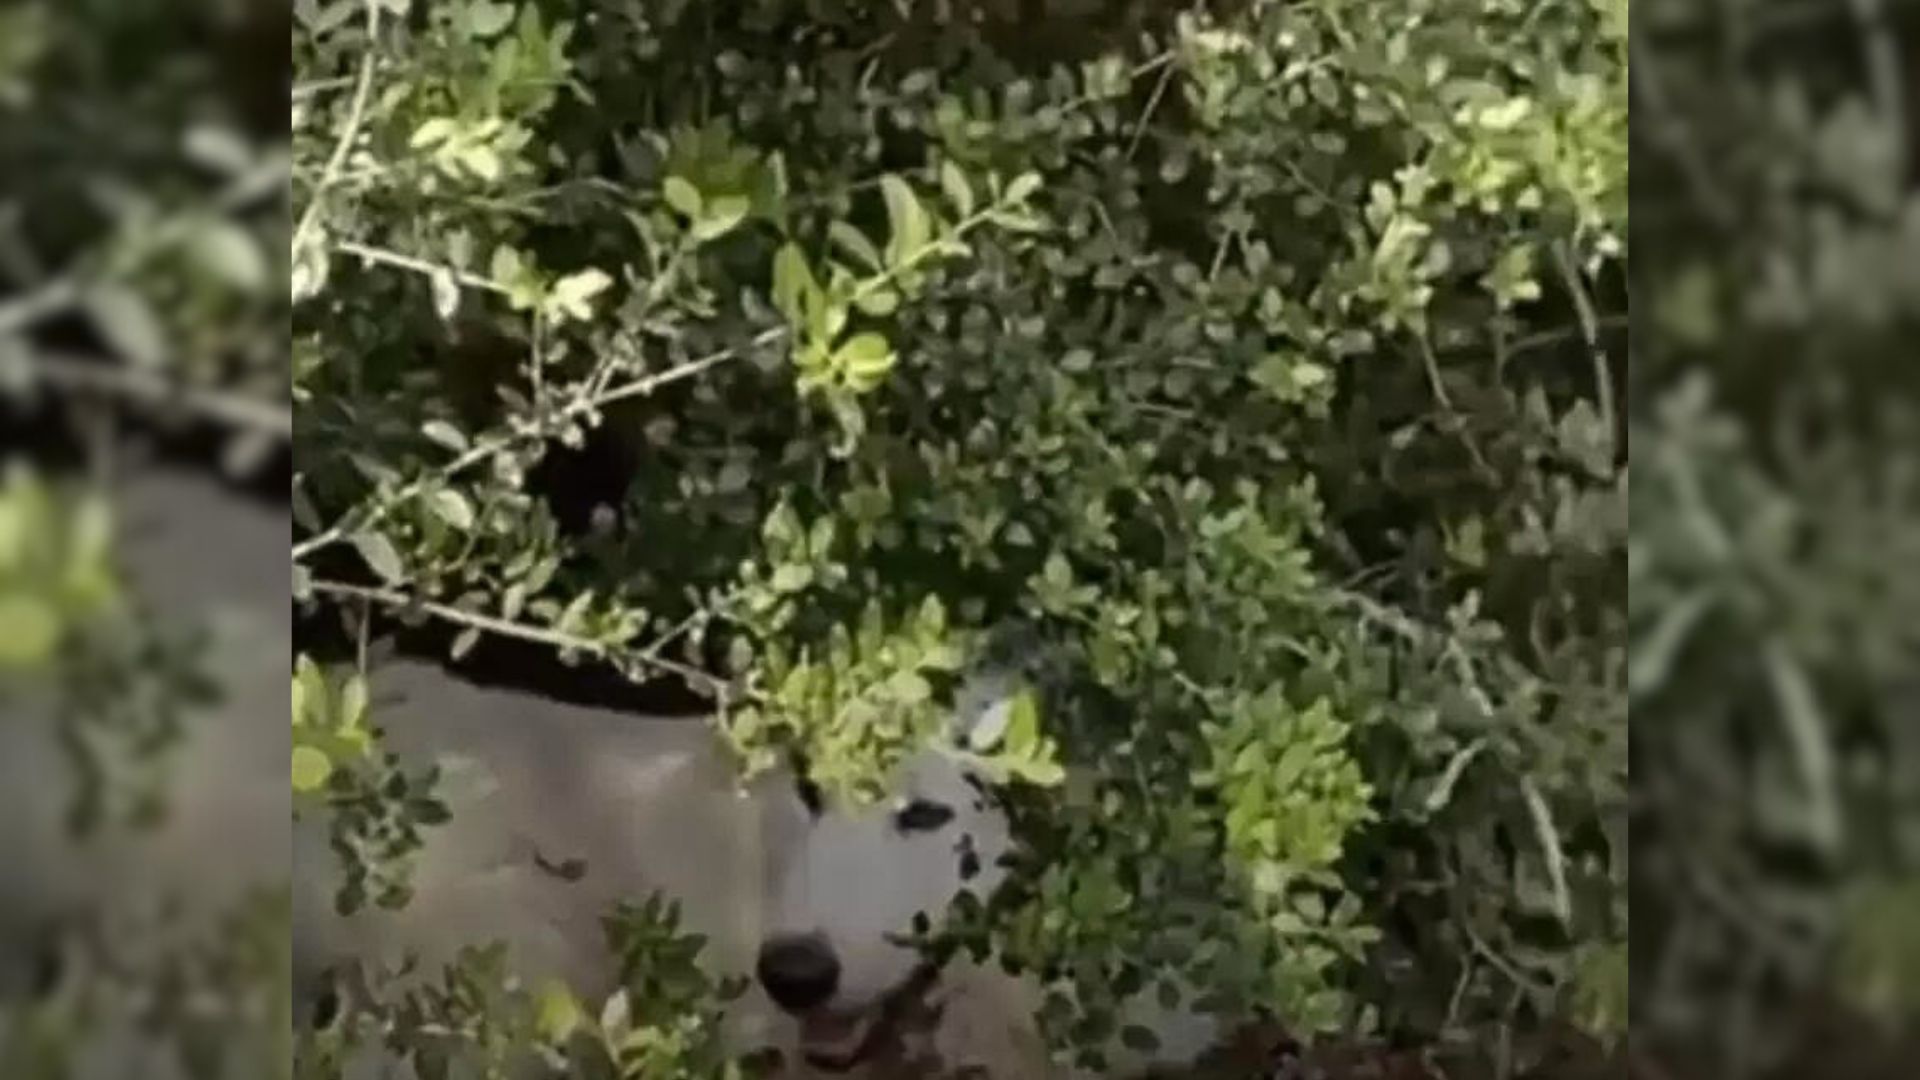 Woman Noticed Someone Was Hiding In The Bushes Near Her Mailbox, So She Went To Investigate